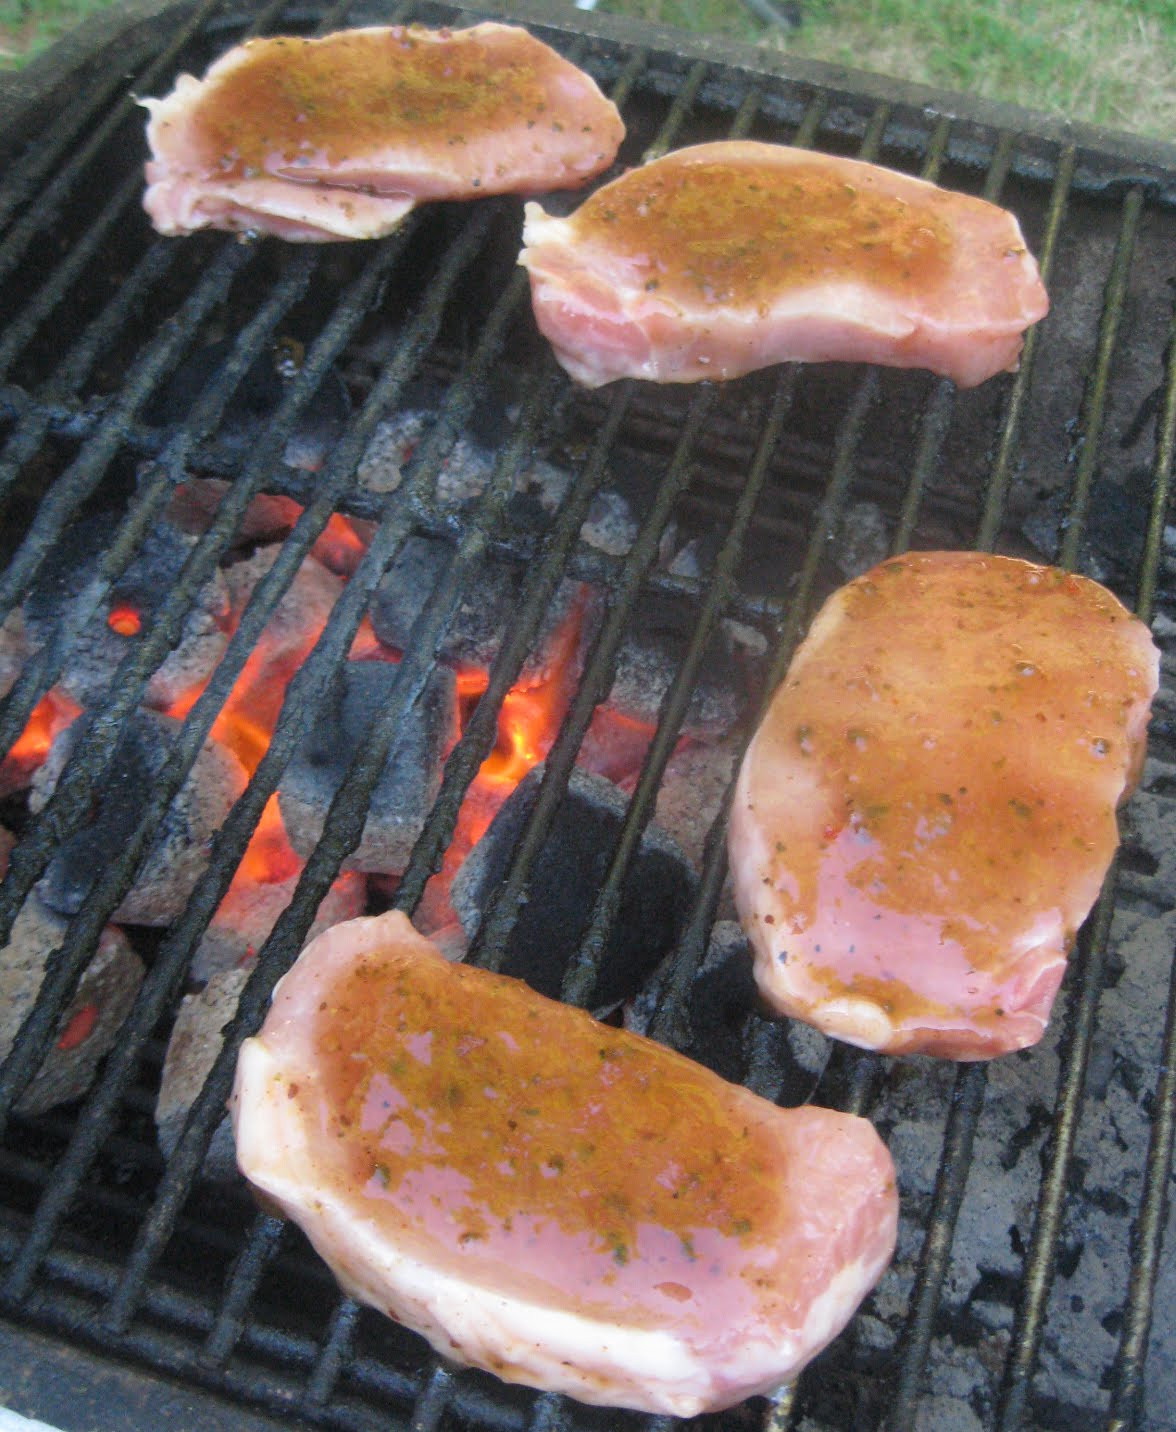 Grill Boneless Pork Chops
 Barbecue Master How to Grill Boneless Pork Chops